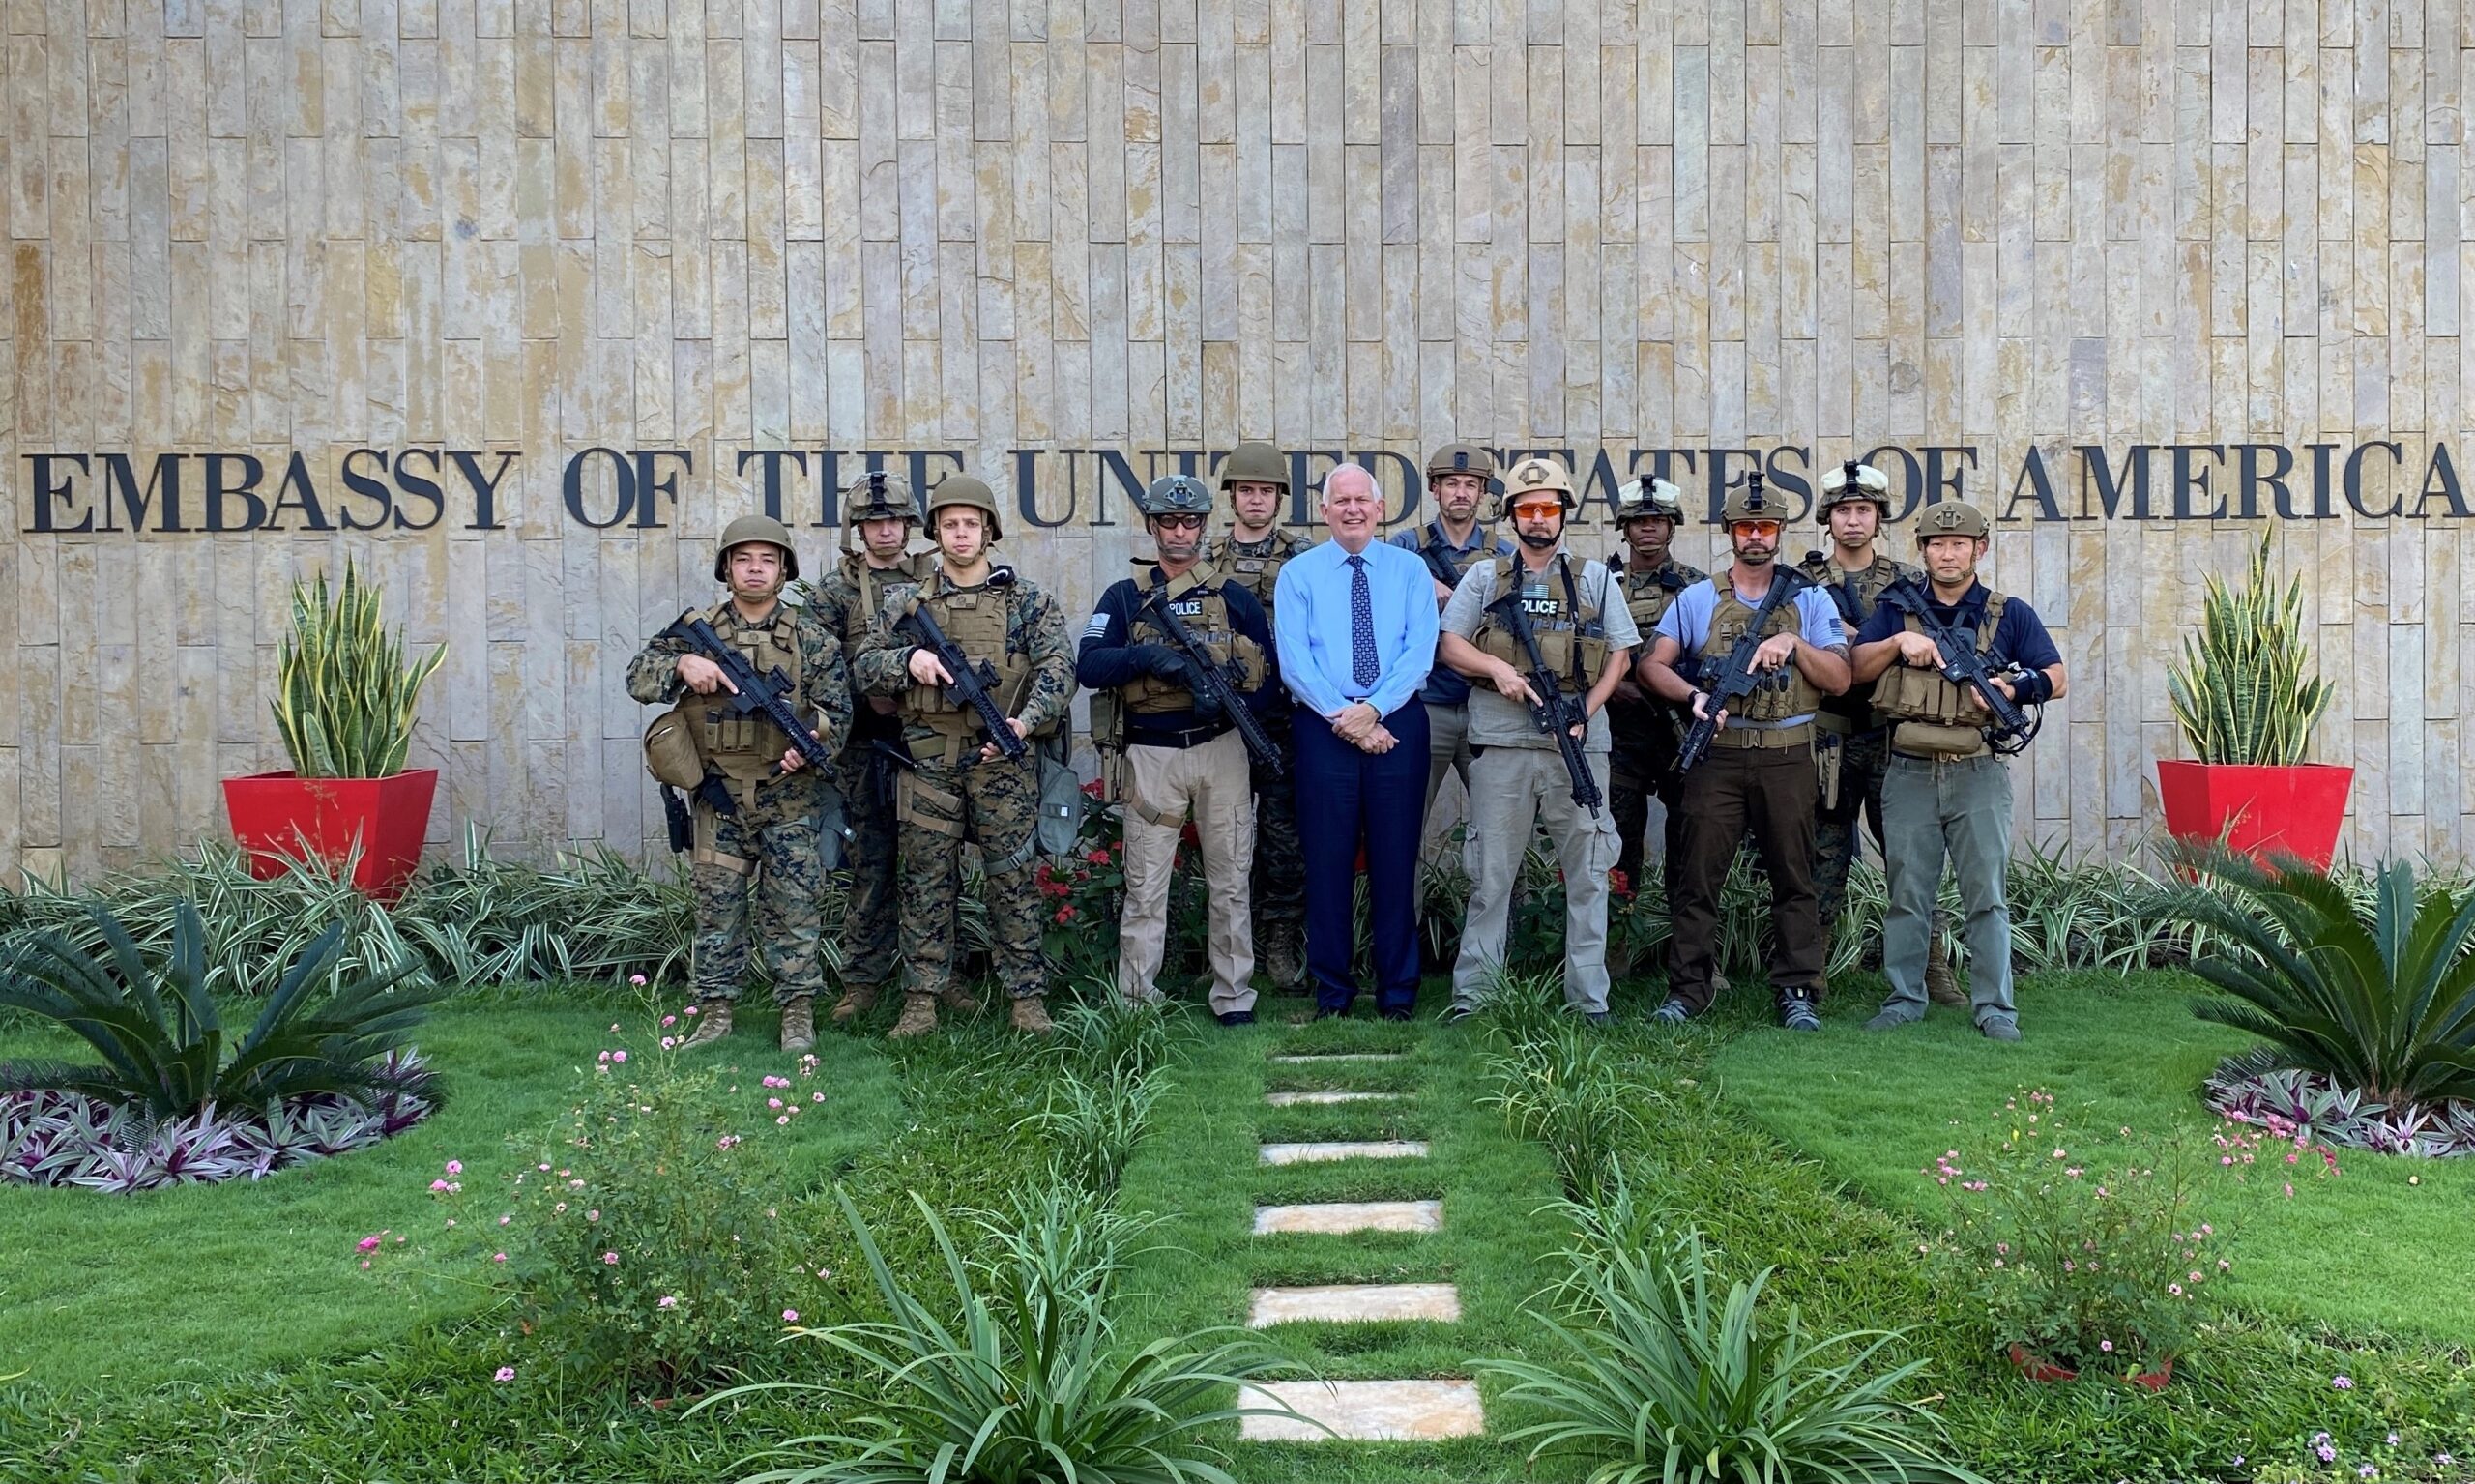 DSS special agents and Marine Security Guards pose with U.S. Ambassador Donald Wright (center, wearing blue shirt) outside the U.S. Embassy following the completion of a bomb scenario exercise, Dar es Salaam, Tanzania, July 6, 2021. (U.S. Department of State photo)